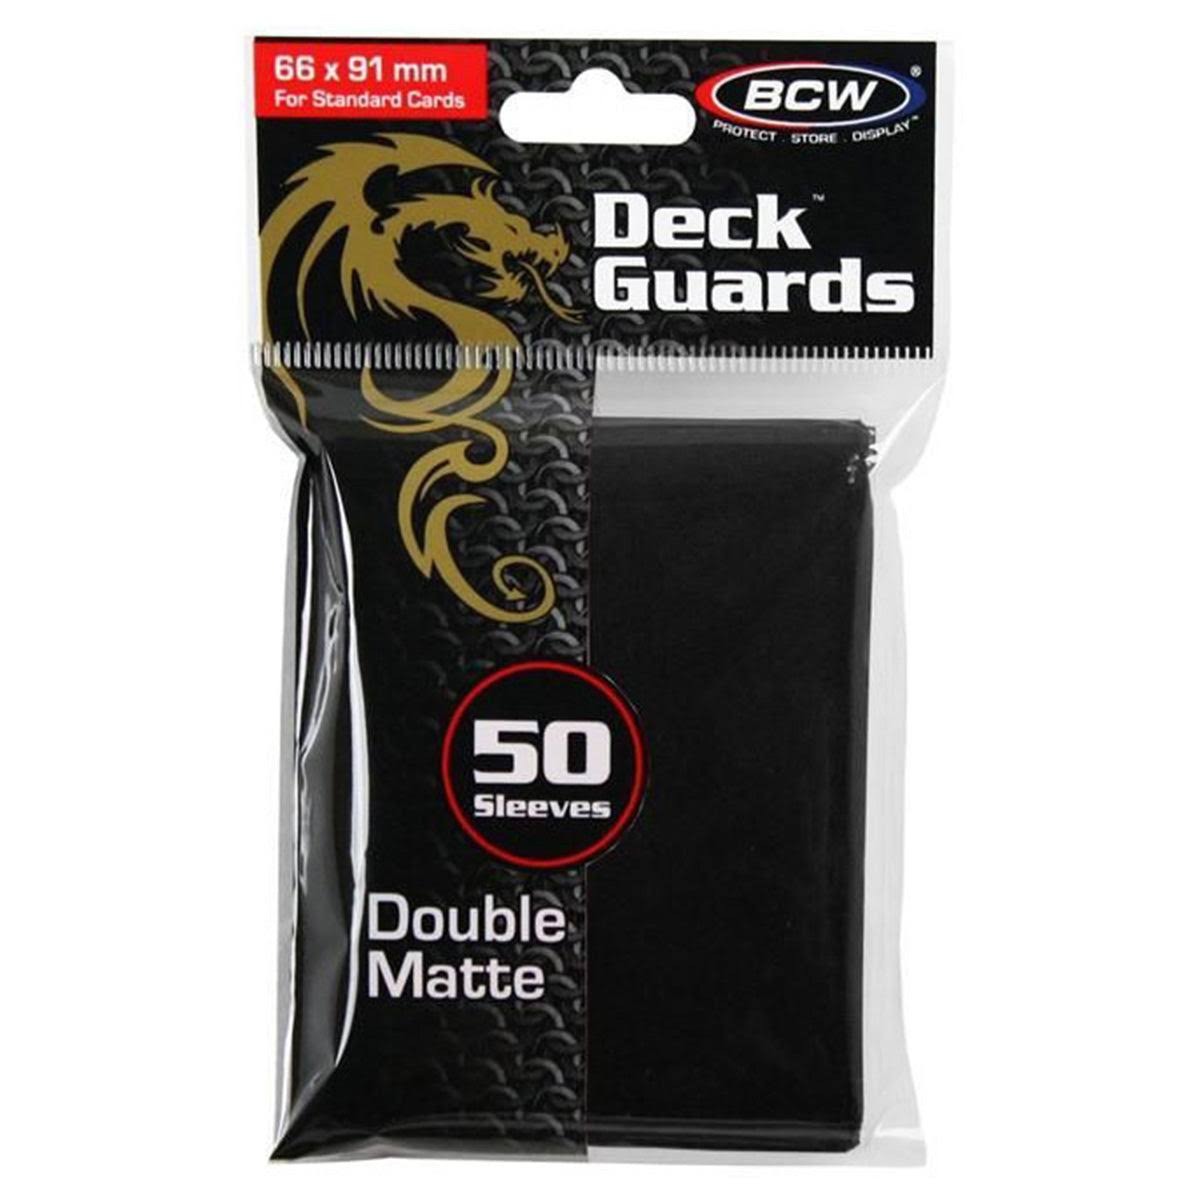 Premium Double Matte Deck Guard Sleeve Protectors For Gaming Cards - Black, 50ct